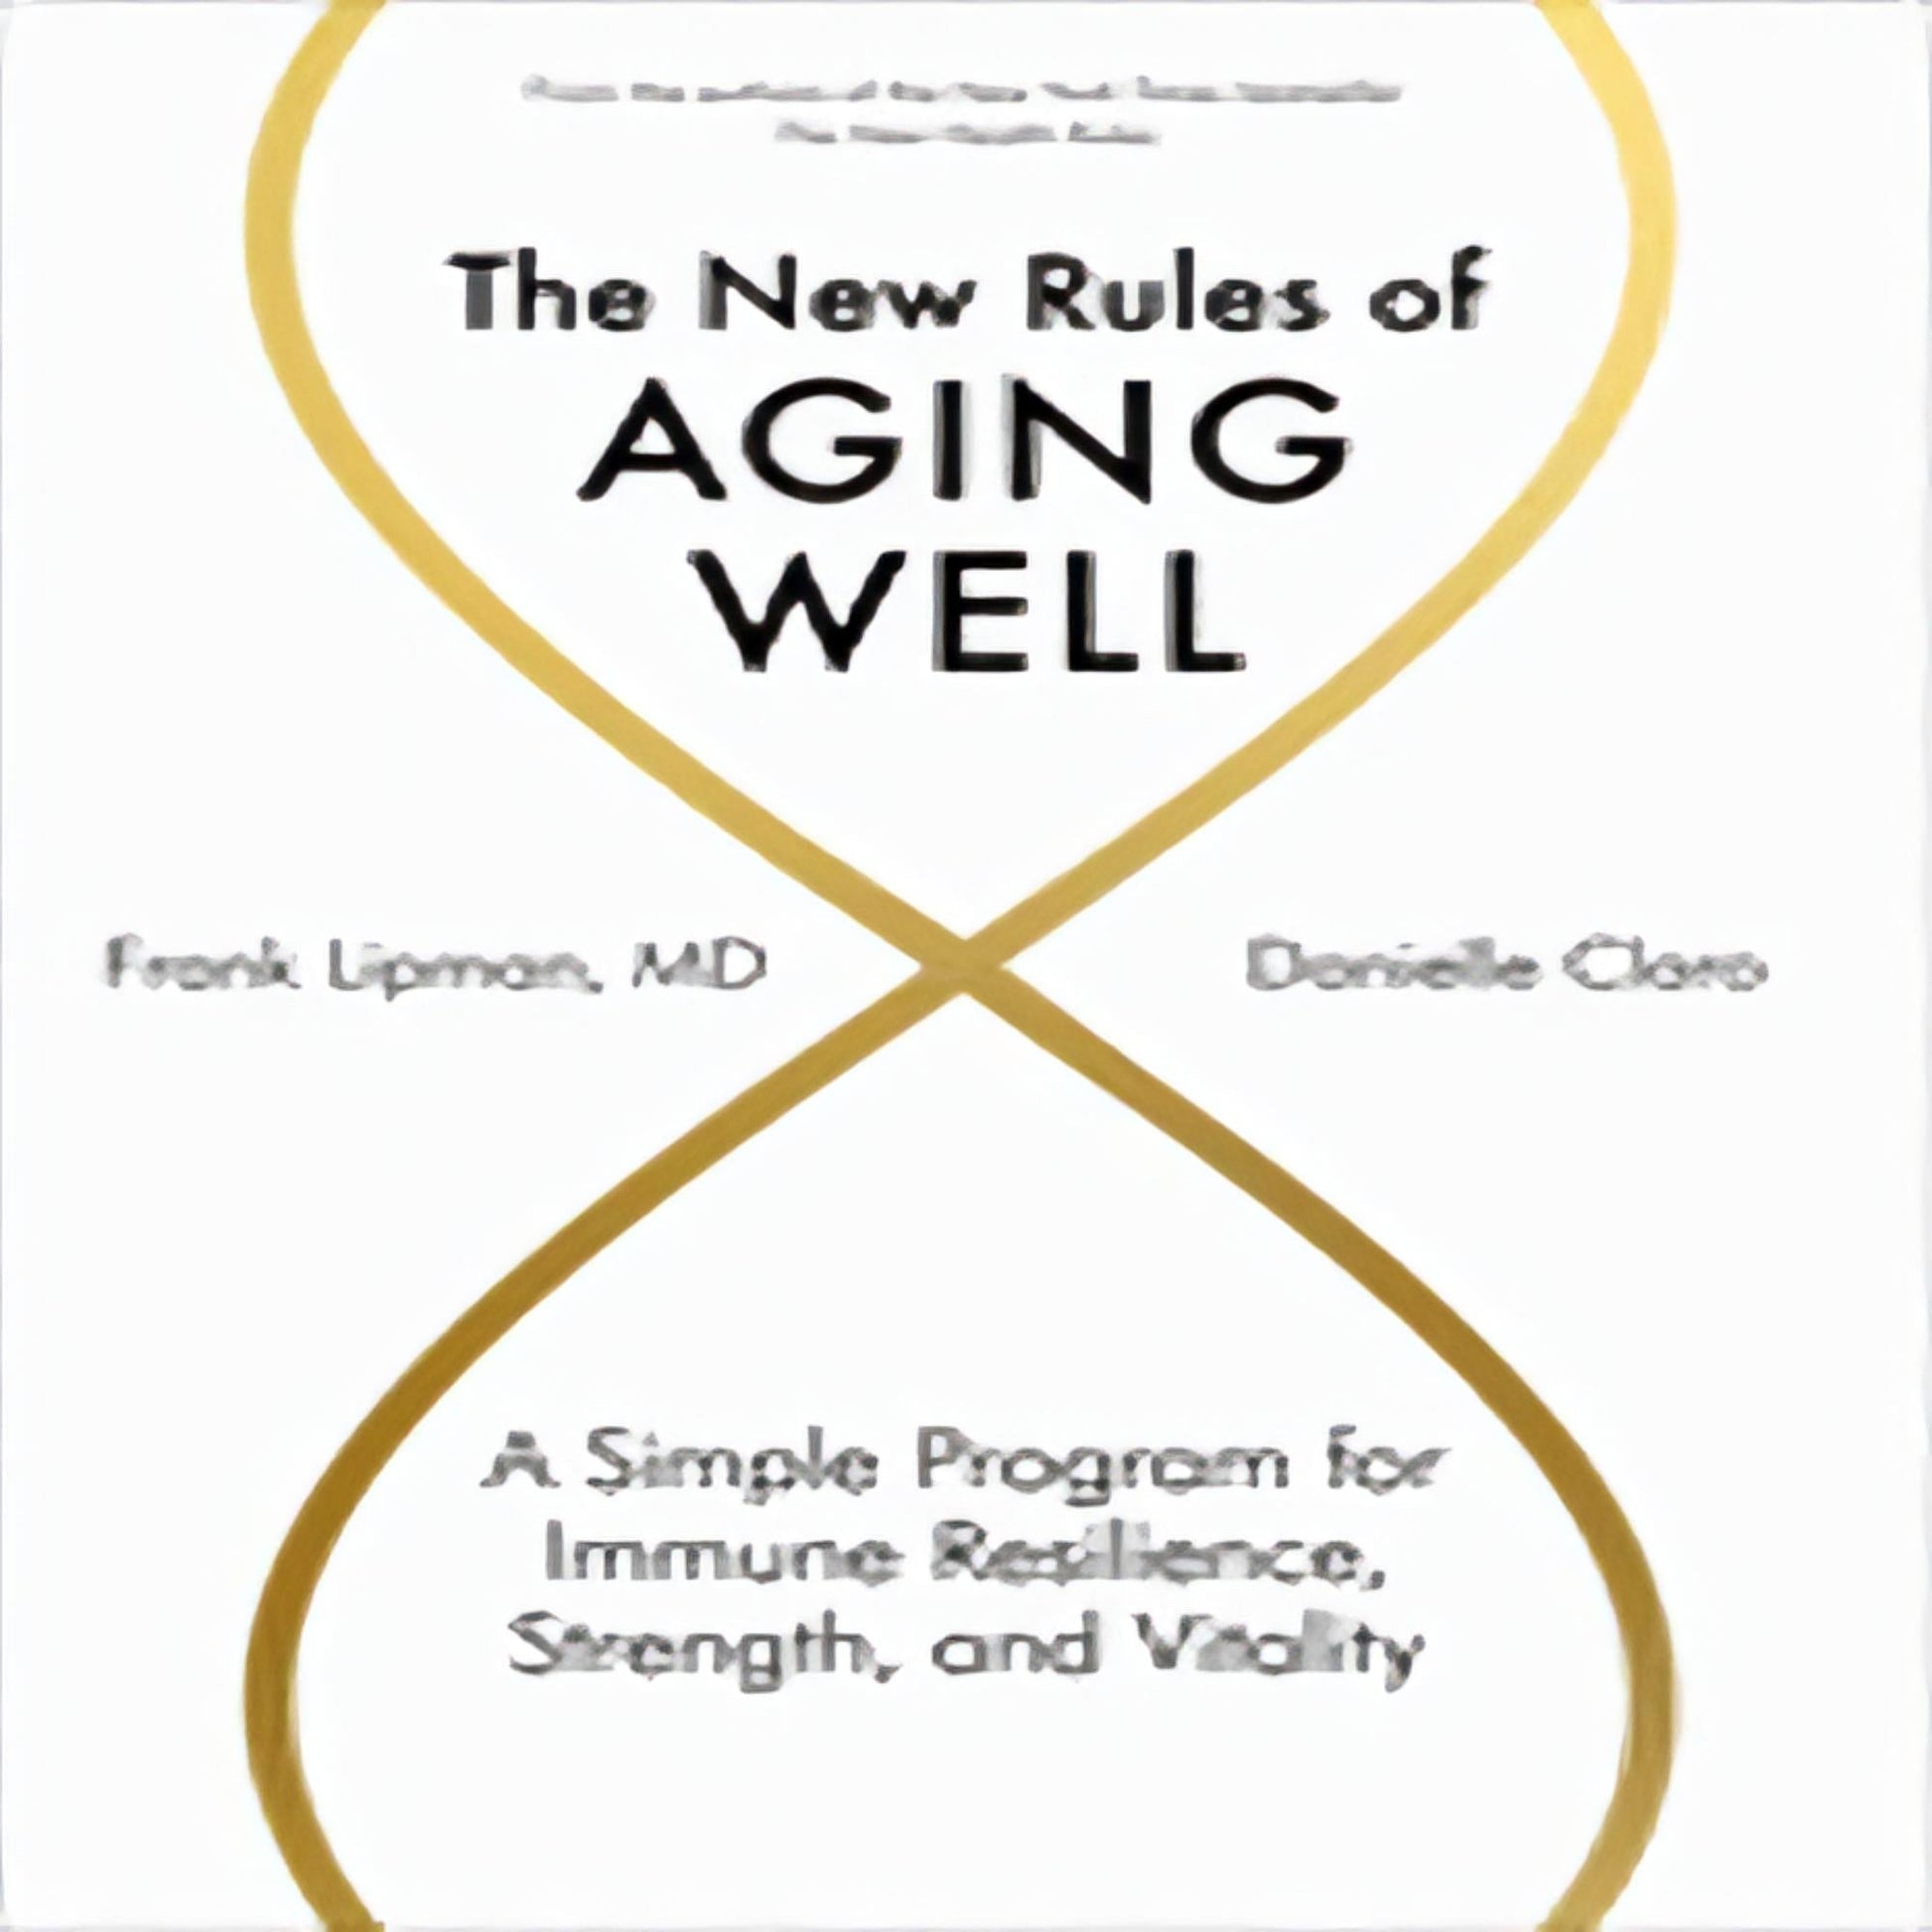 The New Rules of Aging Well: A Simple Program for Immune Resilience, Strength, and Vitality198-030323-1579659594DPGBOOKSTORE.COM. Today's Bestsellers.